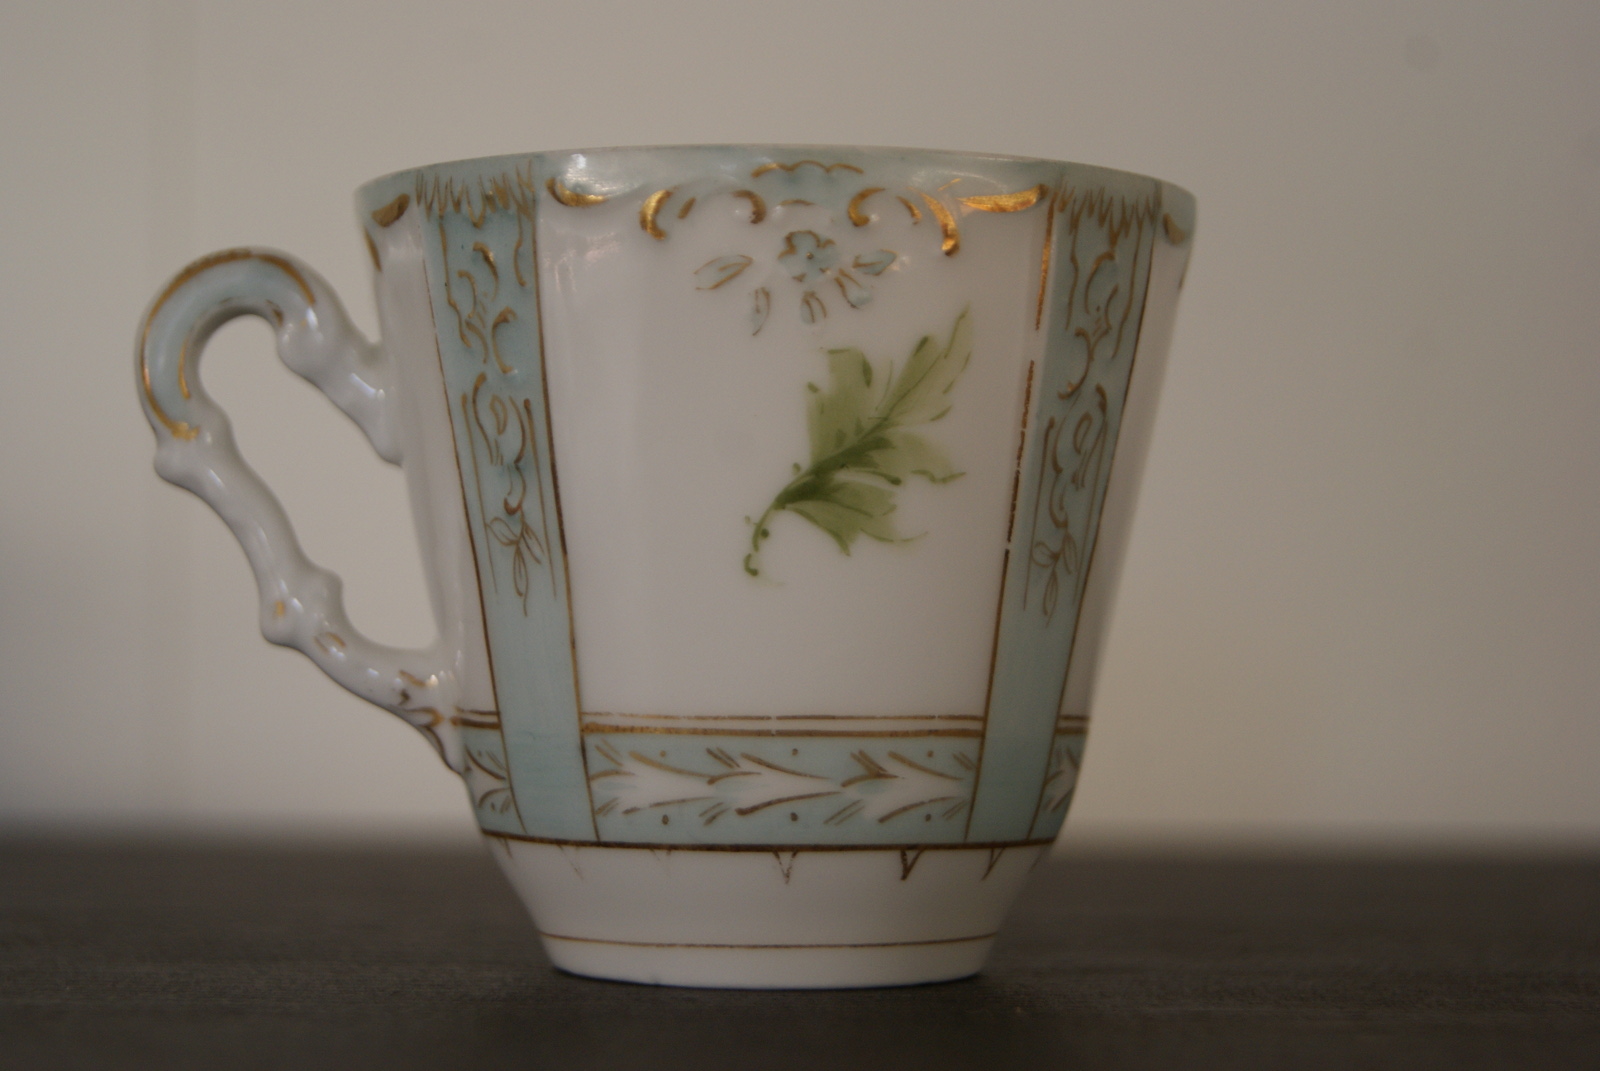 Niedersaltzbrunn Hermann Ohme cup with saucer and plate, handpainted green flowers and leaves, blue color, golden decor